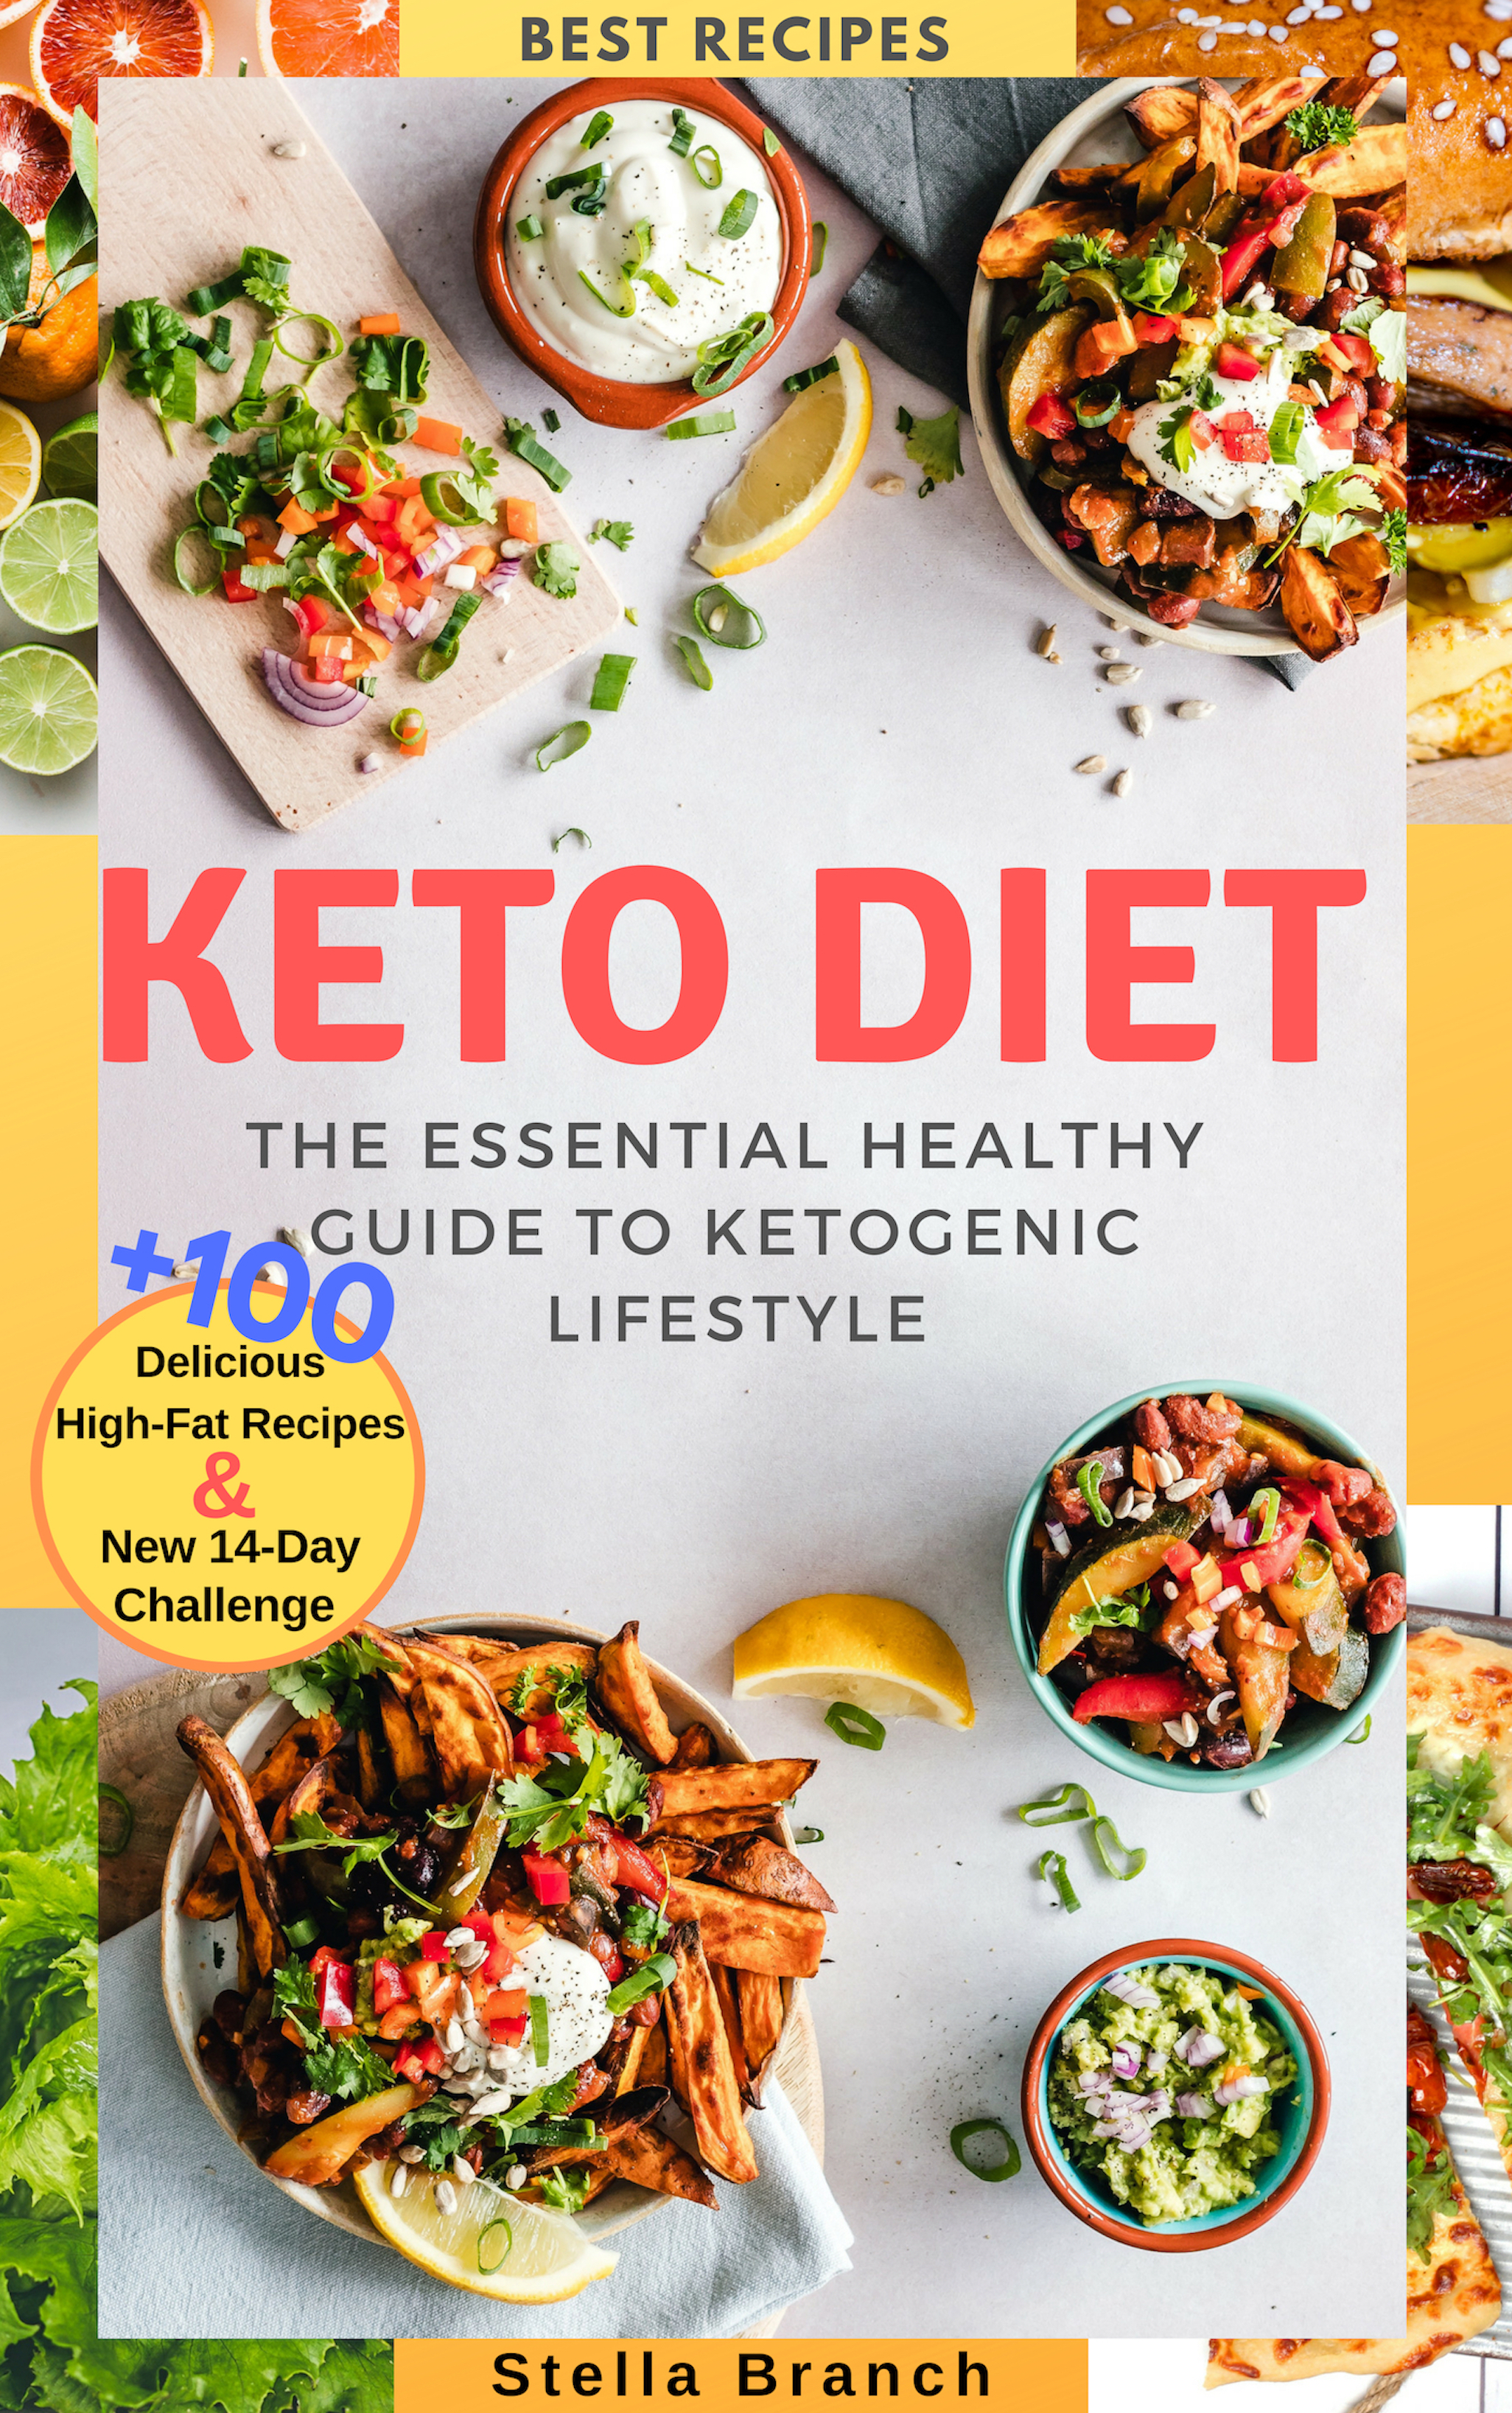 FREE: Keto Diet: The Essential Healthy Guide to Ketogenic Lifestyle, 100+ Delicious High-Fat Recipes & New 14-day Challenge by stella